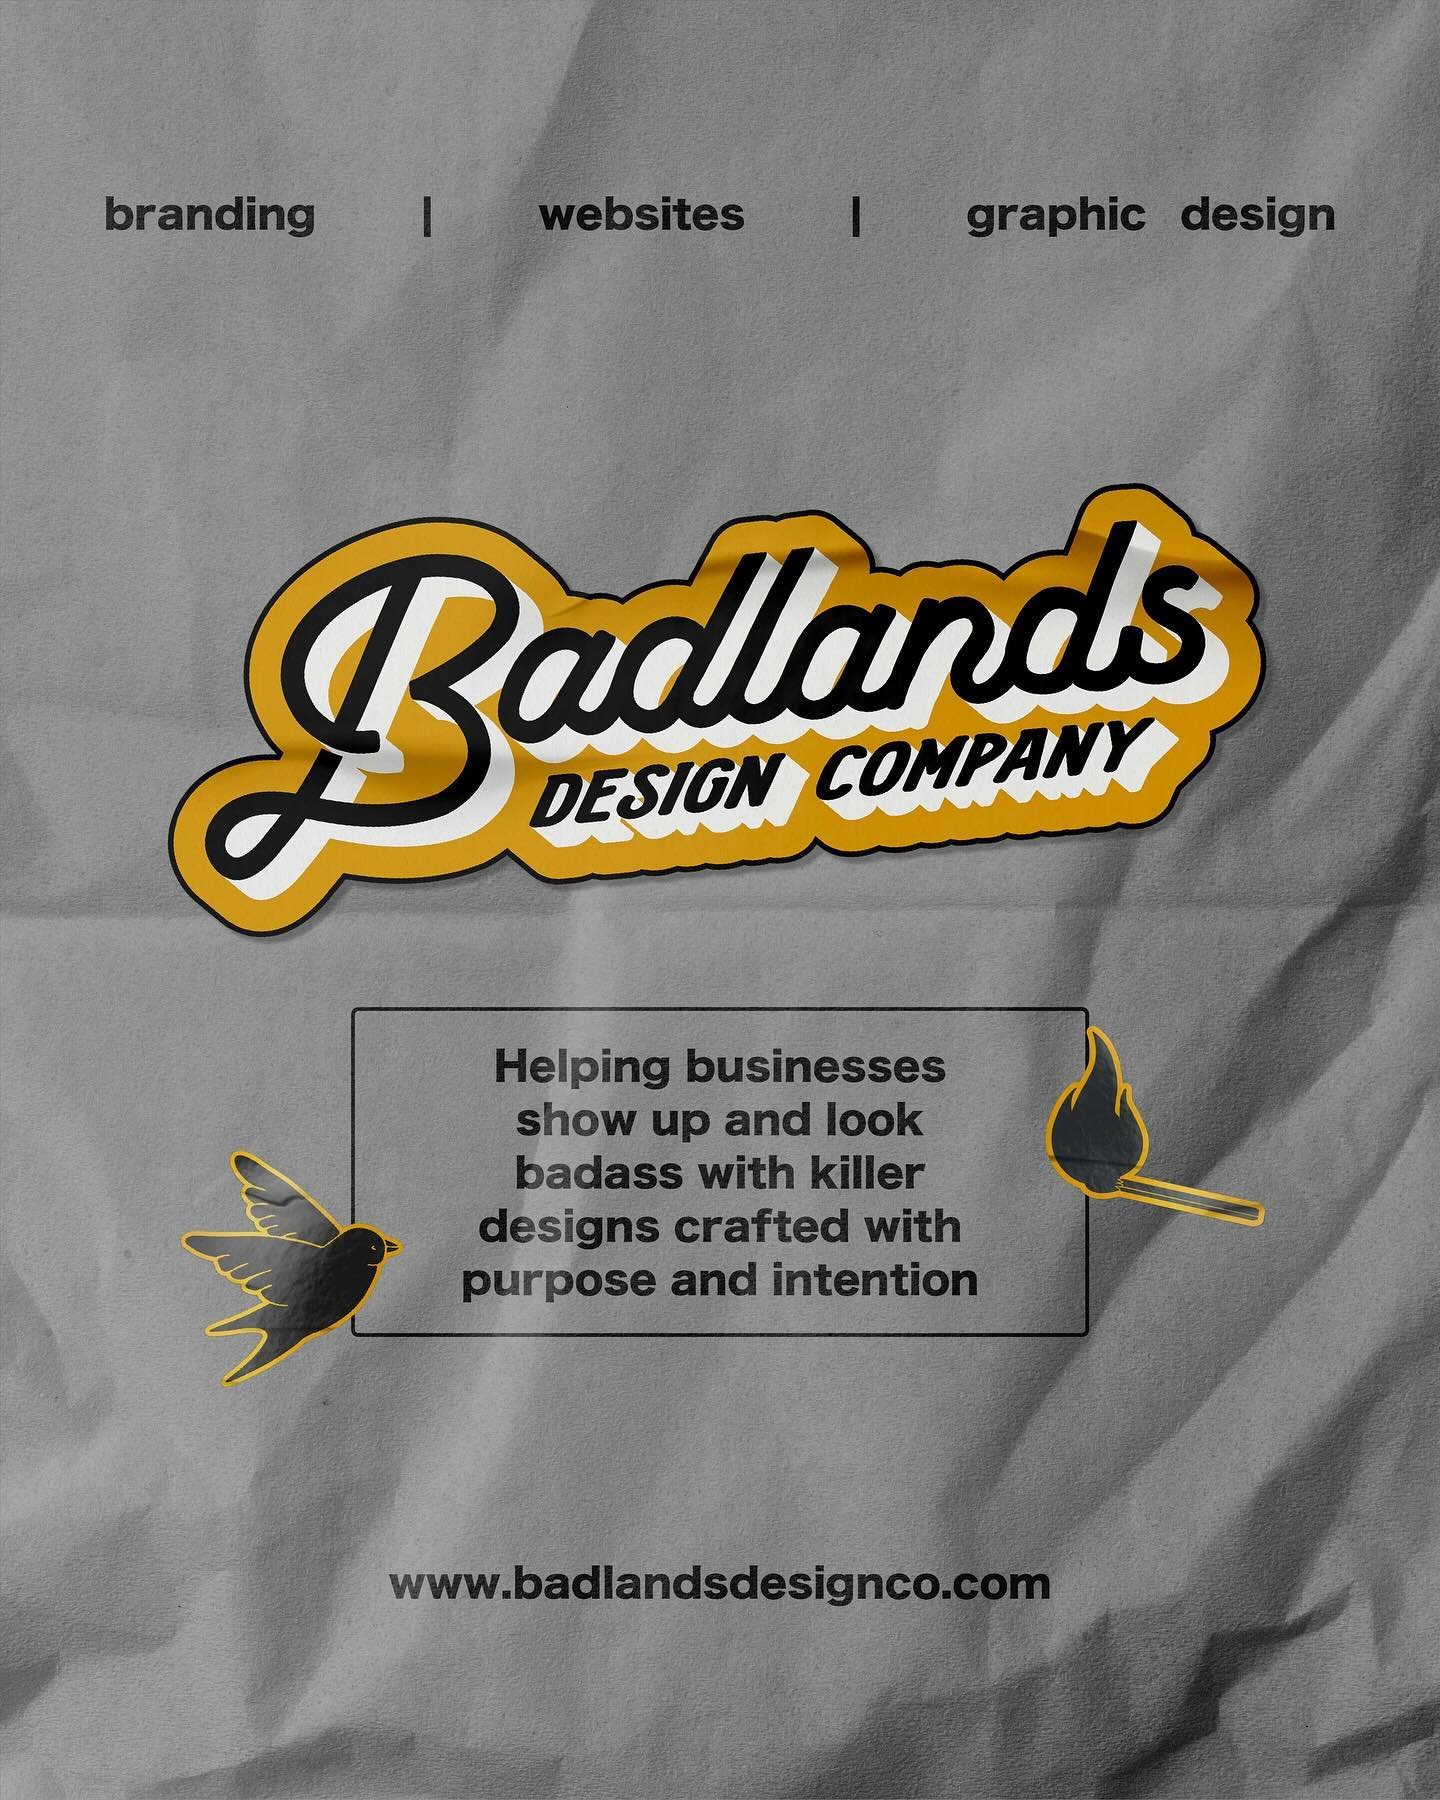 ⚡️Badlands Design Co.⚡️

🏁 The humble design company helping businesses show up and look badass with killer designs crafted with purpose and intention &mdash; since 2020.

📍Located in Kamloops BC - Serving businesses locally + worldwide

❤️&zwj;🔥O